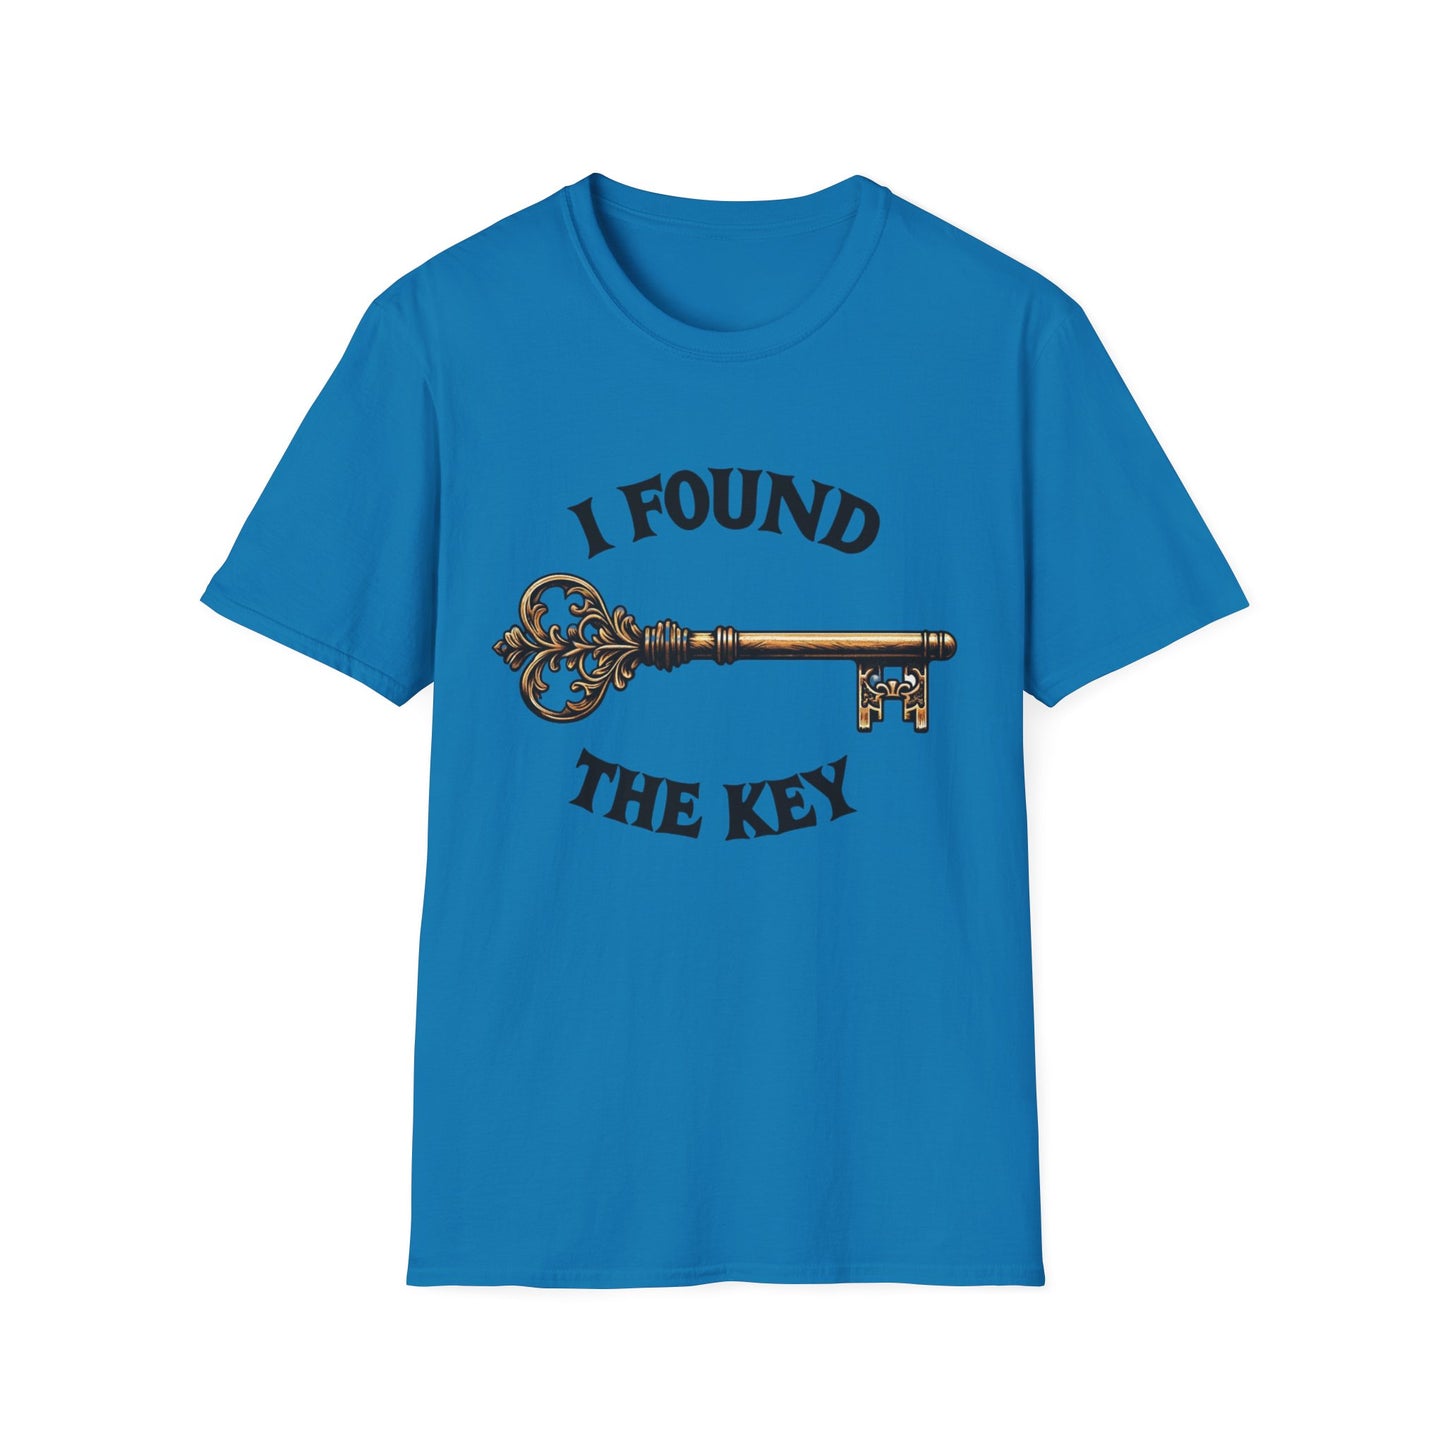 I Found The Key | Deluxe Unisex Tee colors